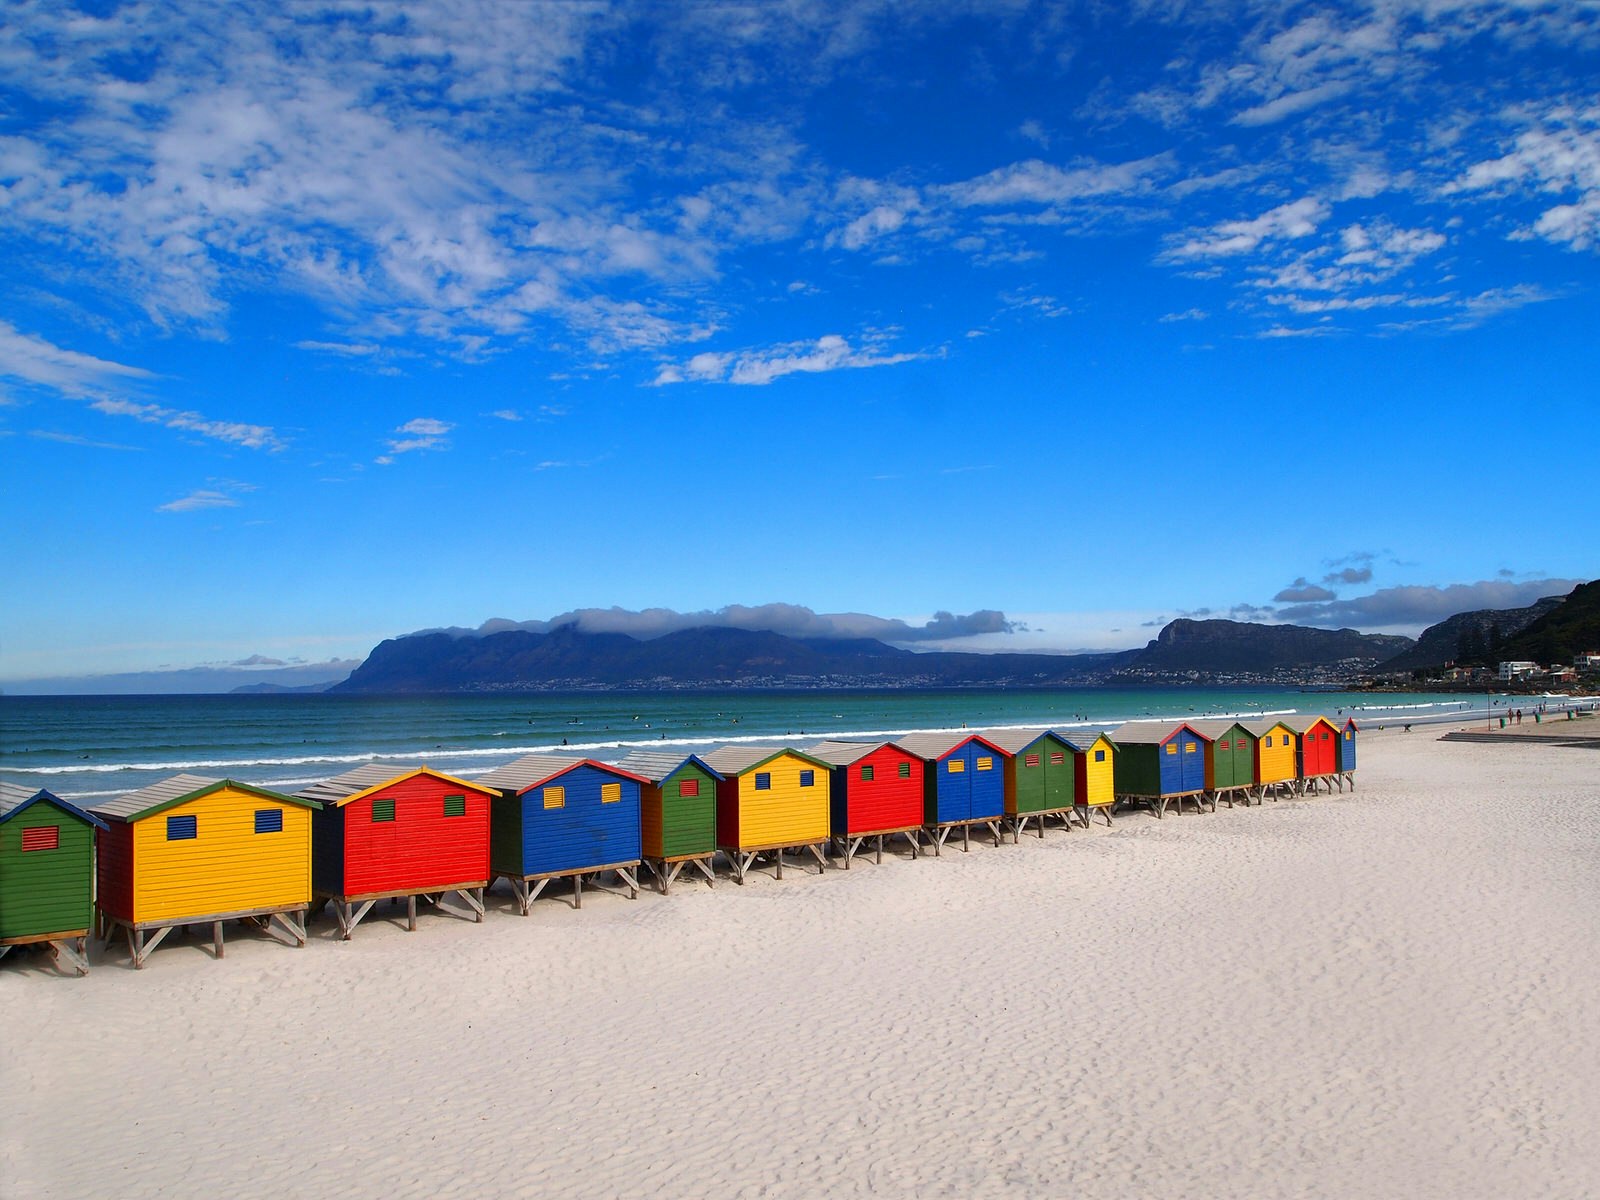 Under a deep blue sky and sitting atop a white sand beach is a line of closely-spaced beach huts. The colours of each is different, some bright yellow, others red, blue or green © Ariadna22822 / Shutterstock